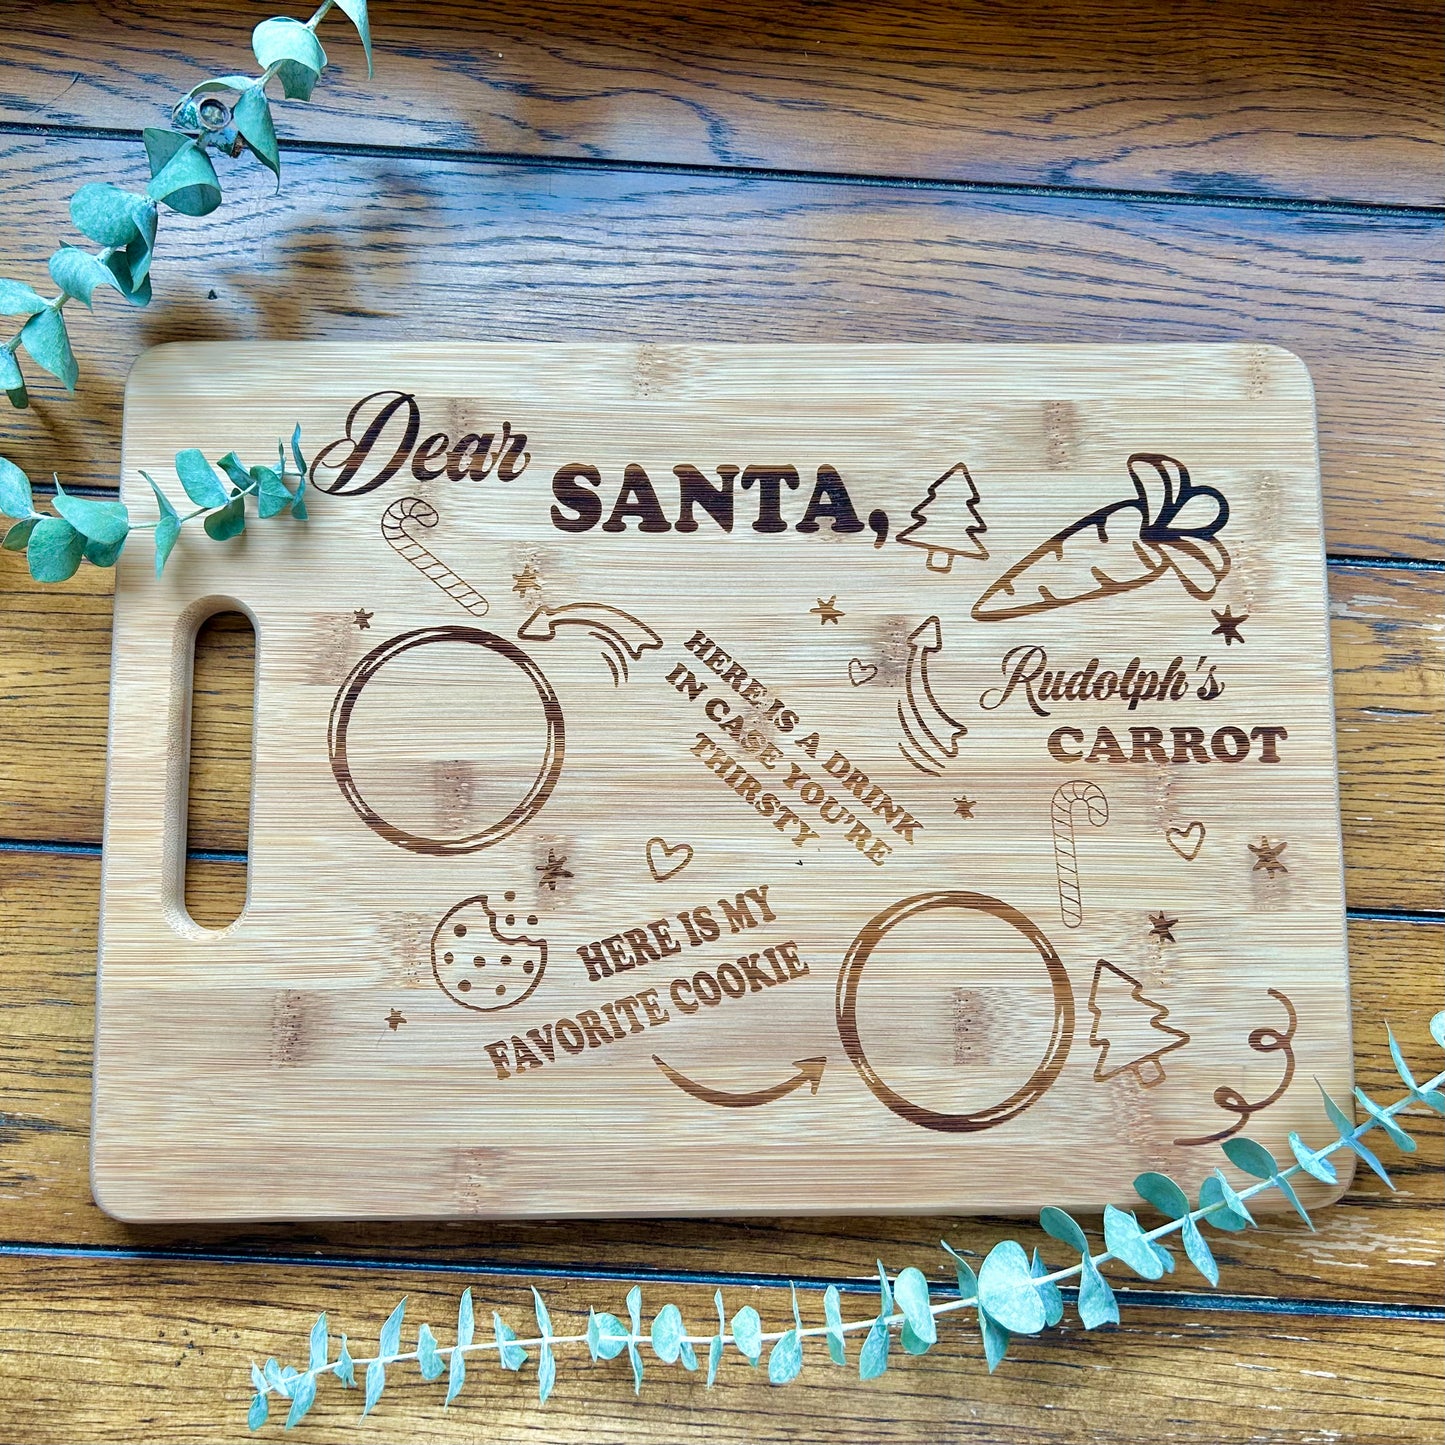 Dear Santa Drink and Cookie Board | Festive 13.75x9.75 Christmas Tray | Made-to-Order Holiday Decor for Memorable Celebrations